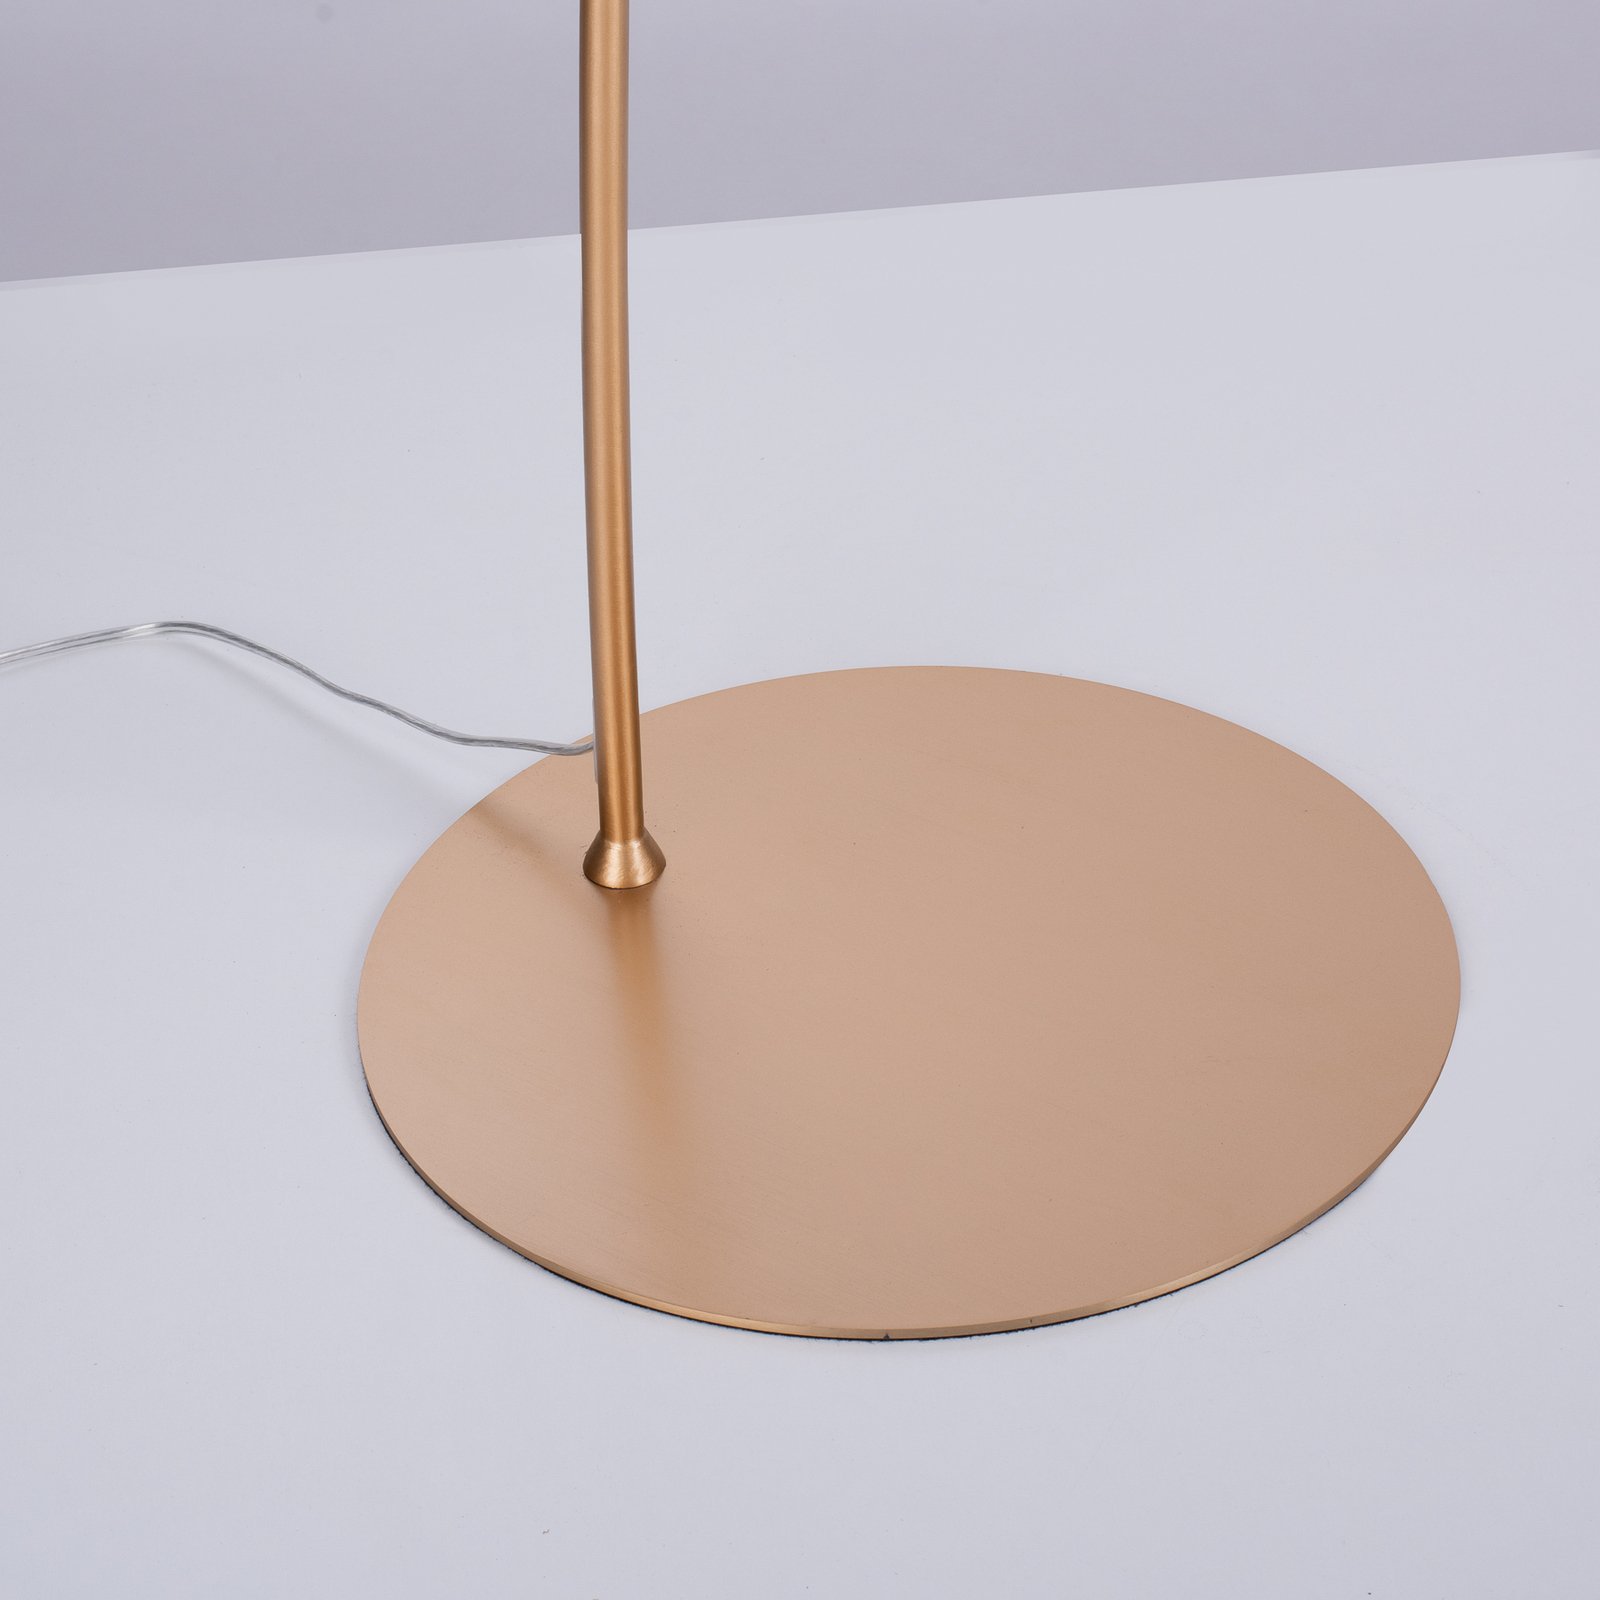 Lampadaire LED Titus, dimmable, laiton mat